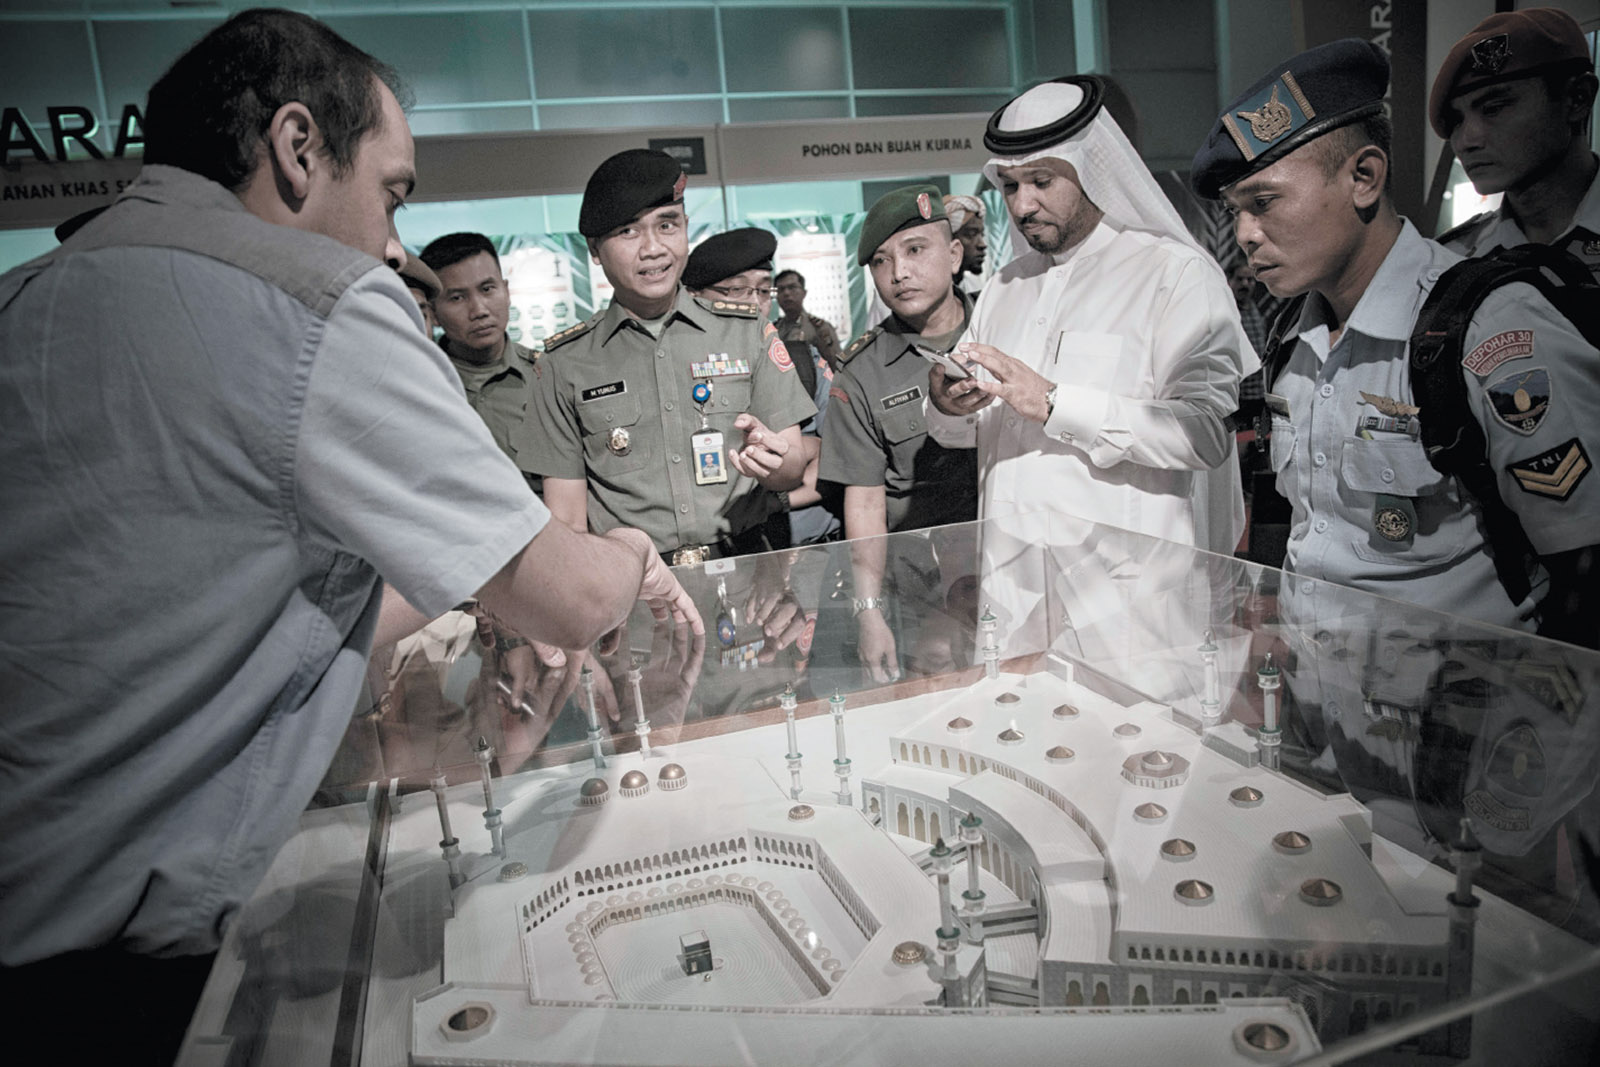 A Saudi official explaining a maquette of the mosque at Mecca to members of the Indonesian military at  a Saudi-sponsored festival in Jakarta, March 2016